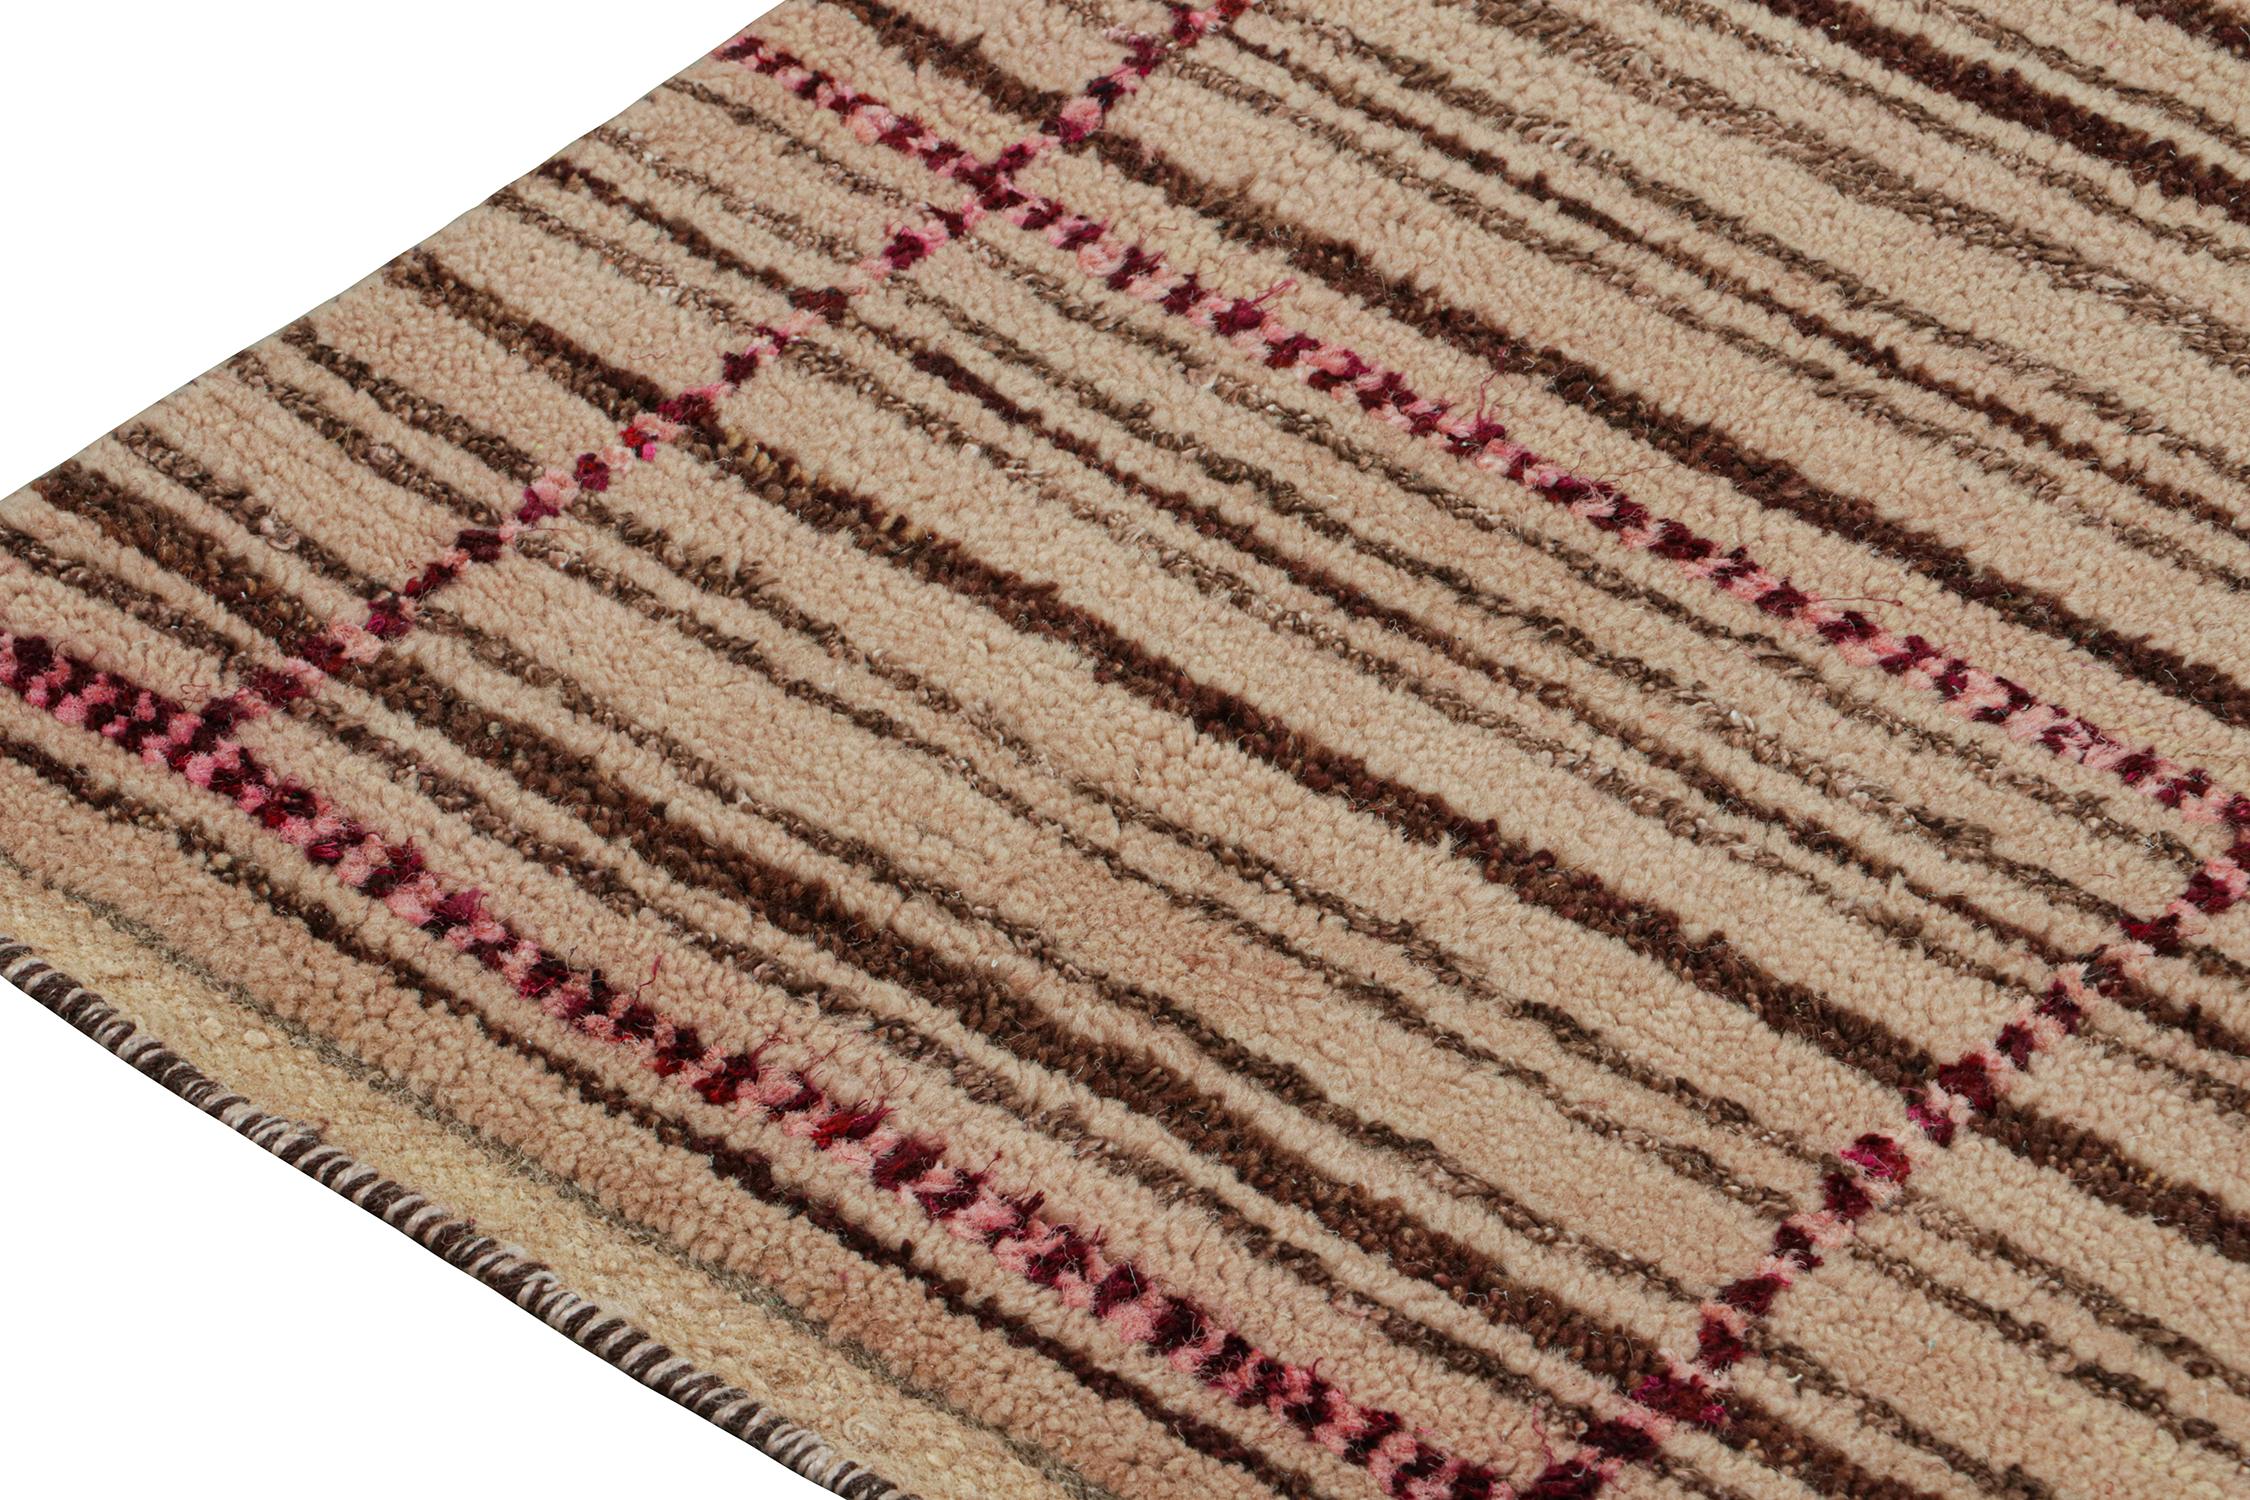 Hand-Knotted Rug & Kilim’s Moroccan Style Runner in Beige-Brown and Pink Geometric Patterns For Sale